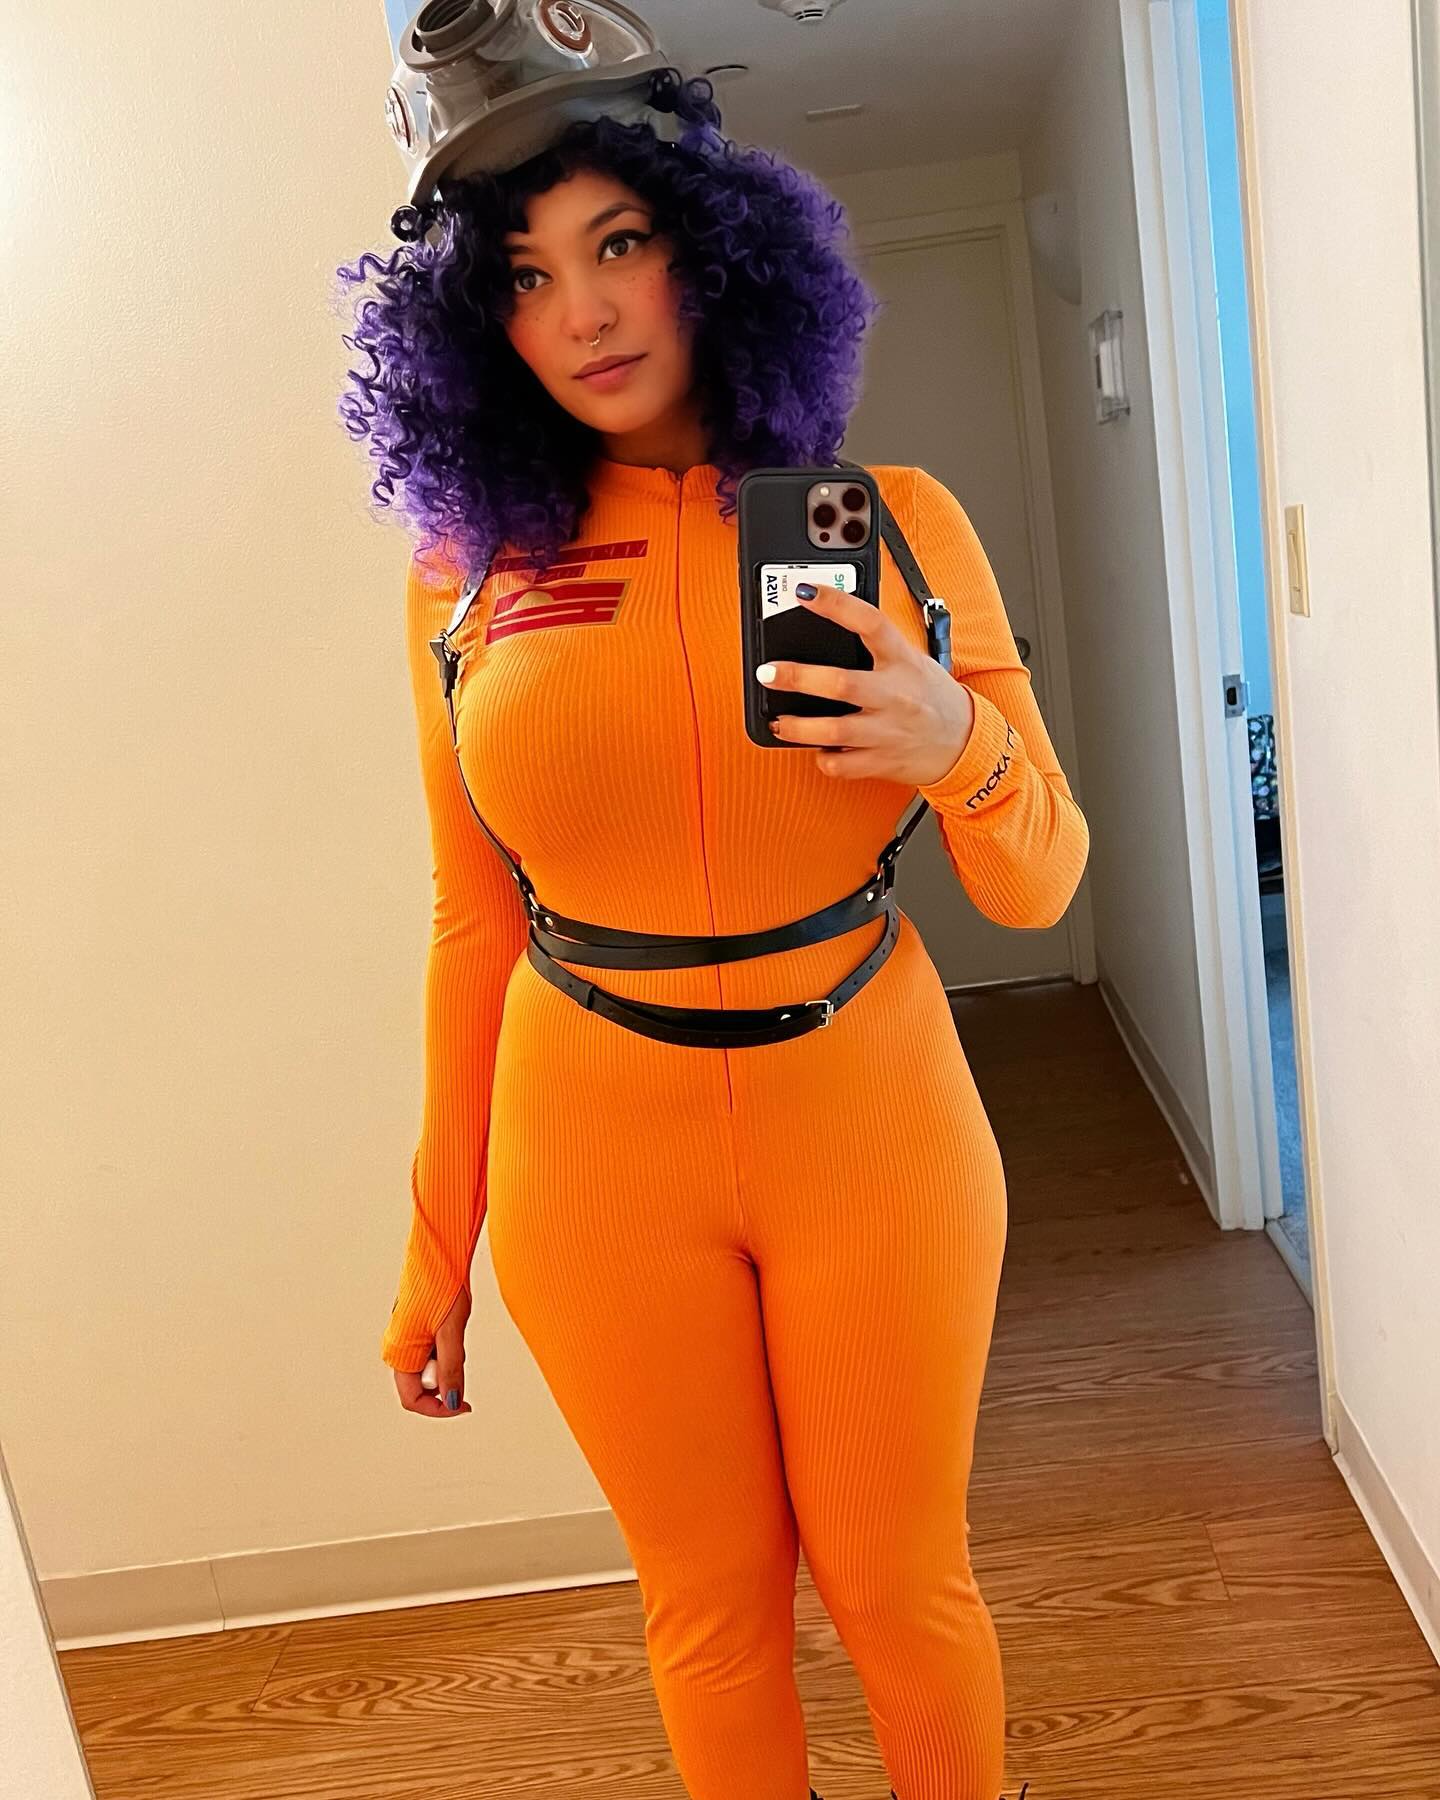 Great great asset.
.
.
.
.
.
#lethalcompany #cosplay #cosplayer #paxeast #gamergirl #boston #curlyhair #curvy #followme #cosplaygirl